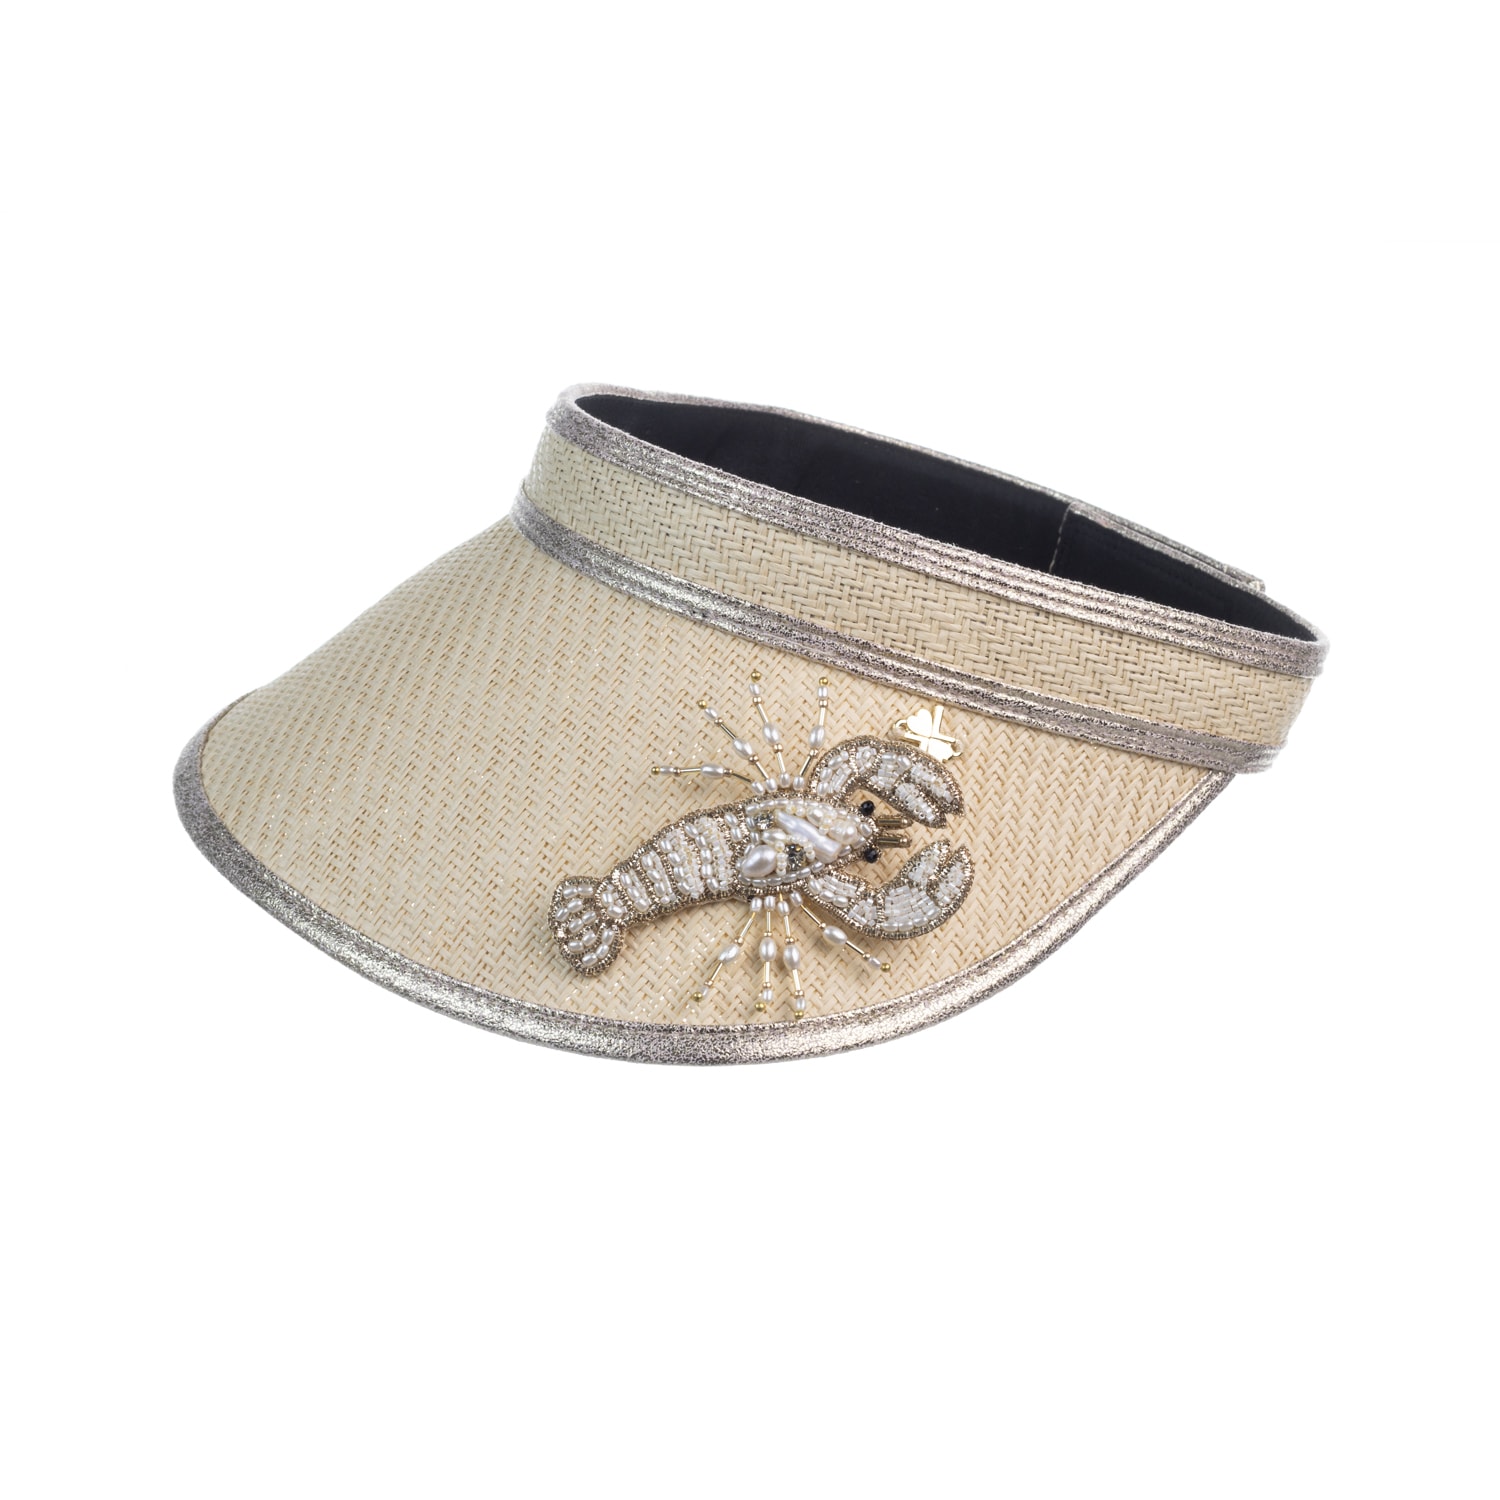 Laines London Women's White Straw Woven Visor With Beaded Lobster Brooch - Cream In Neutral